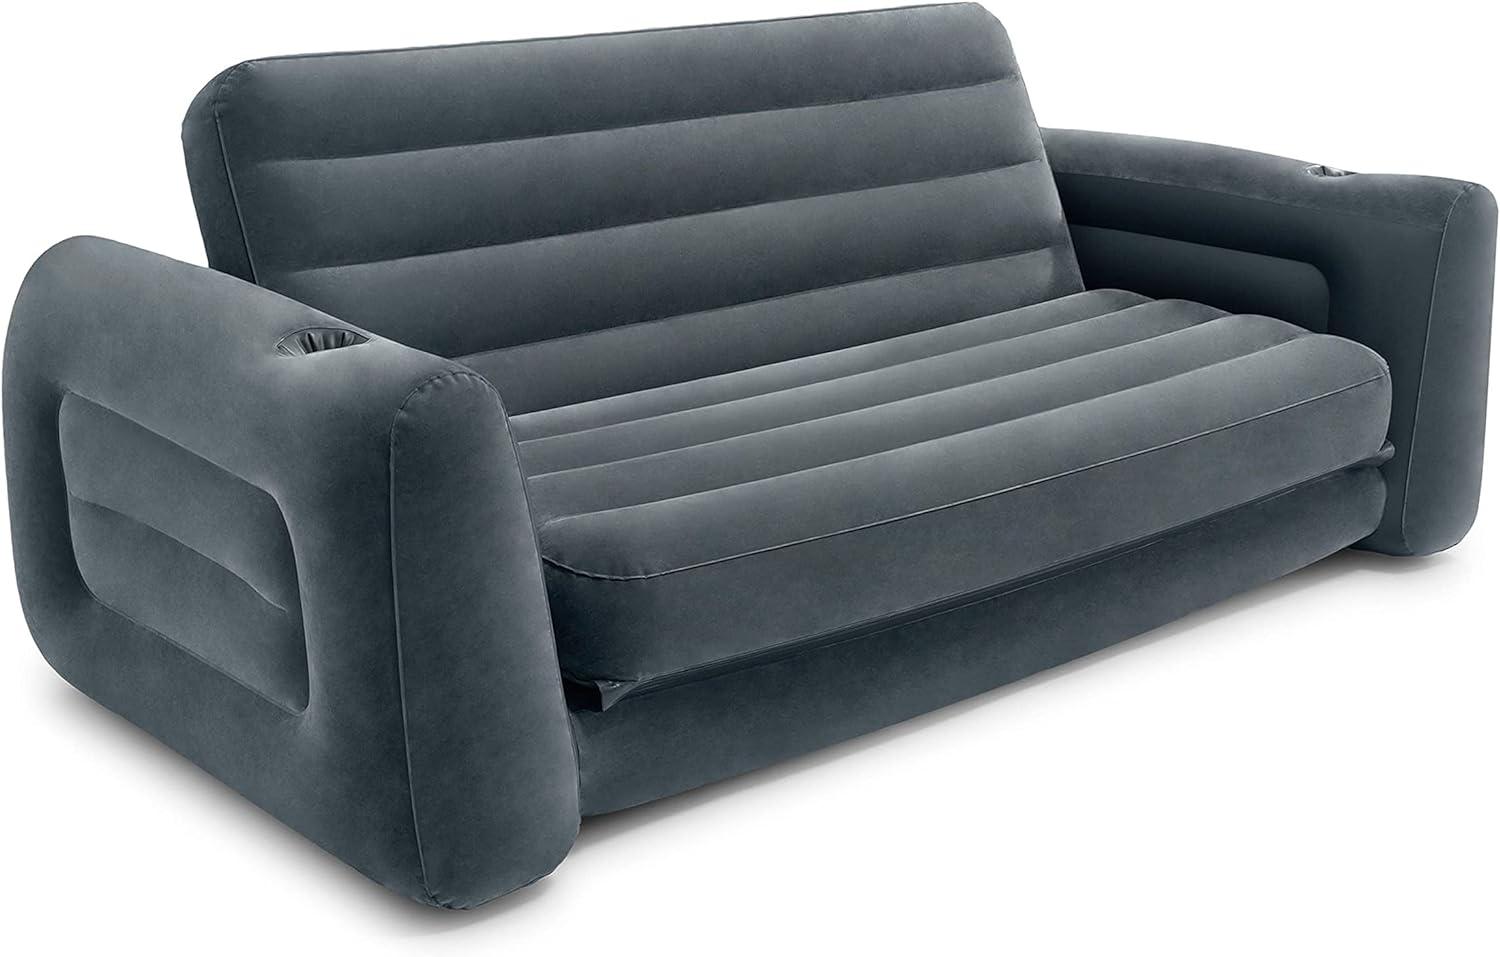 Intex Inflatable 2-in-1 Queen Pull-Out Futon Bed for $43.32 Shipped